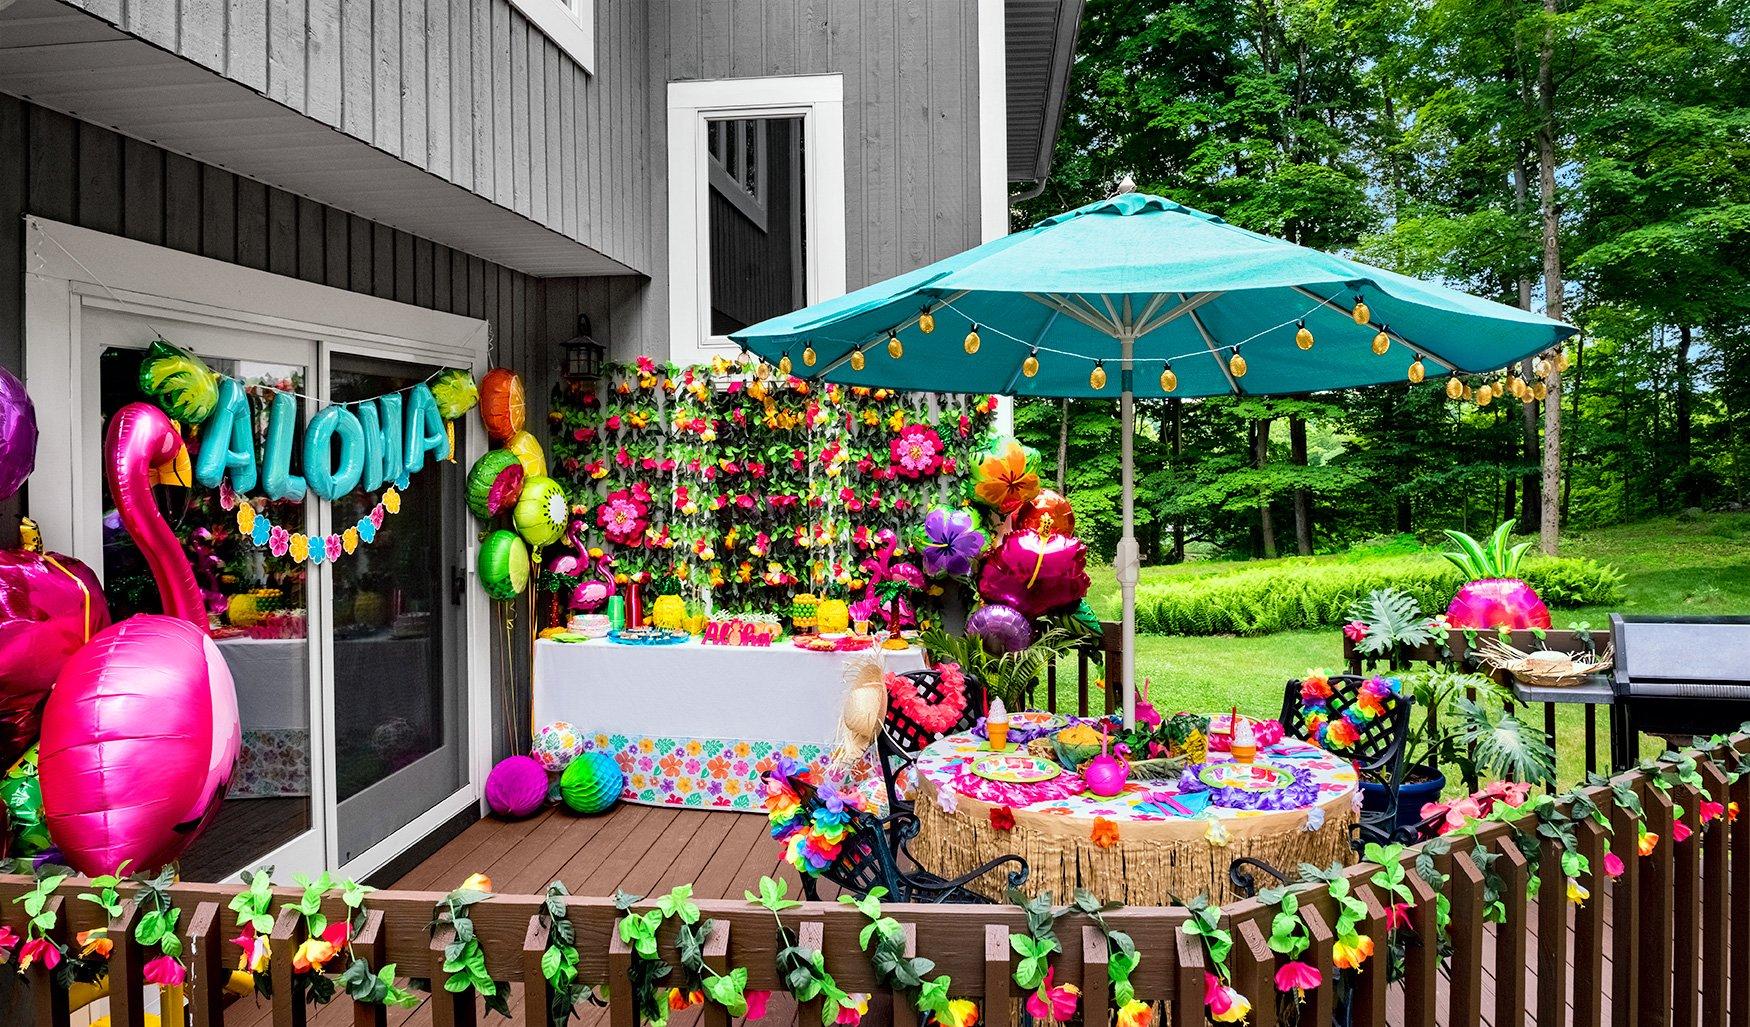 Theme Parties - Party Supplies & Ideas